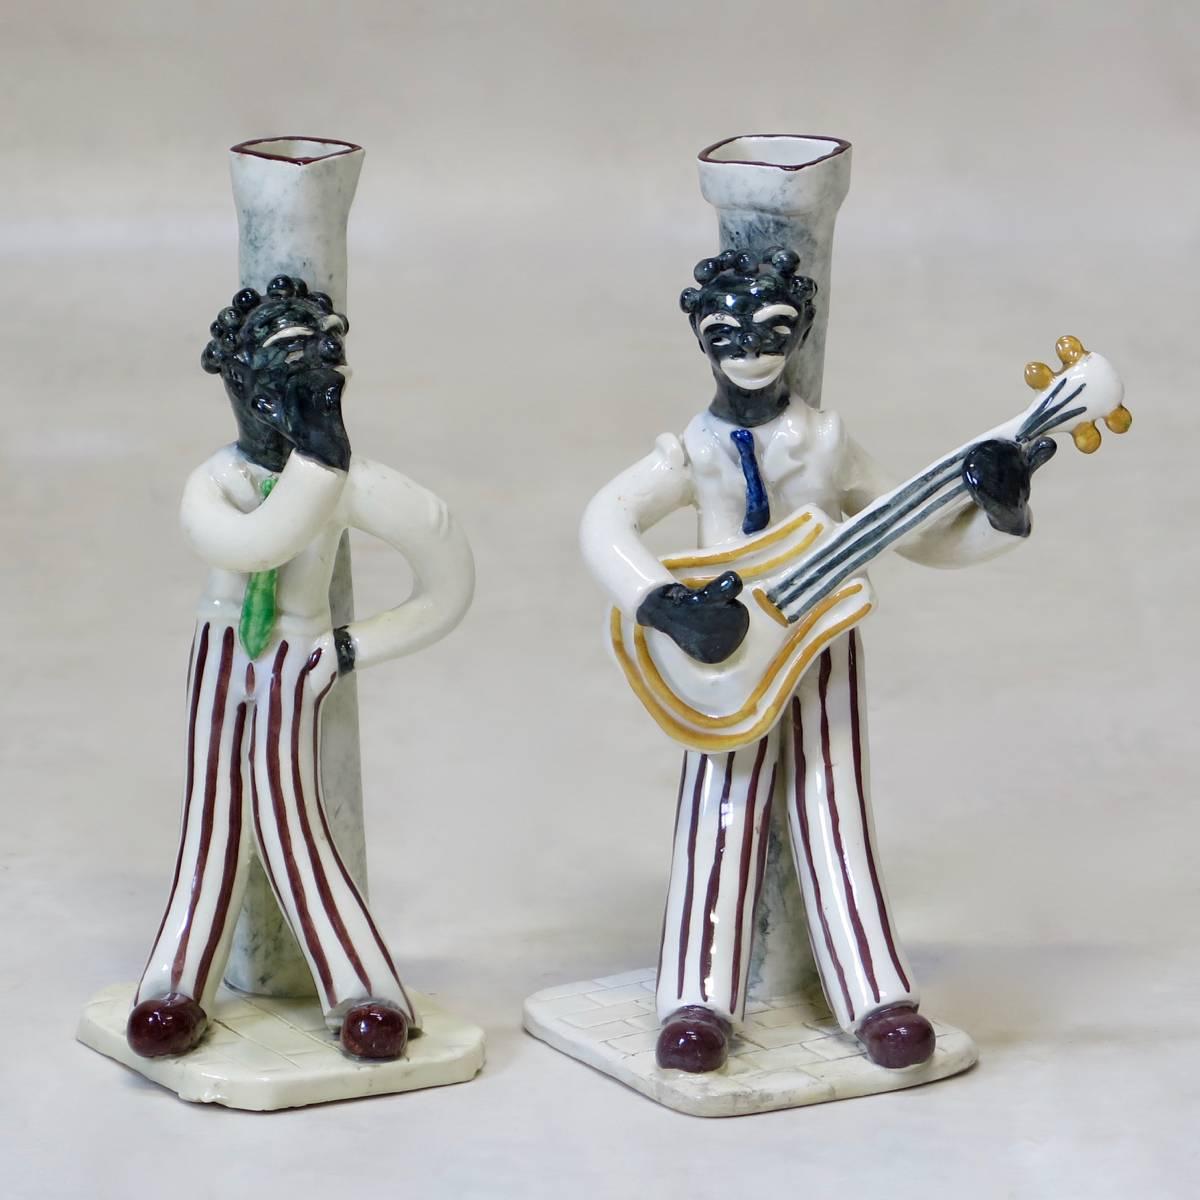 Charming pair of porcelain candlesticks representing musicians from the 1920s-1930s.